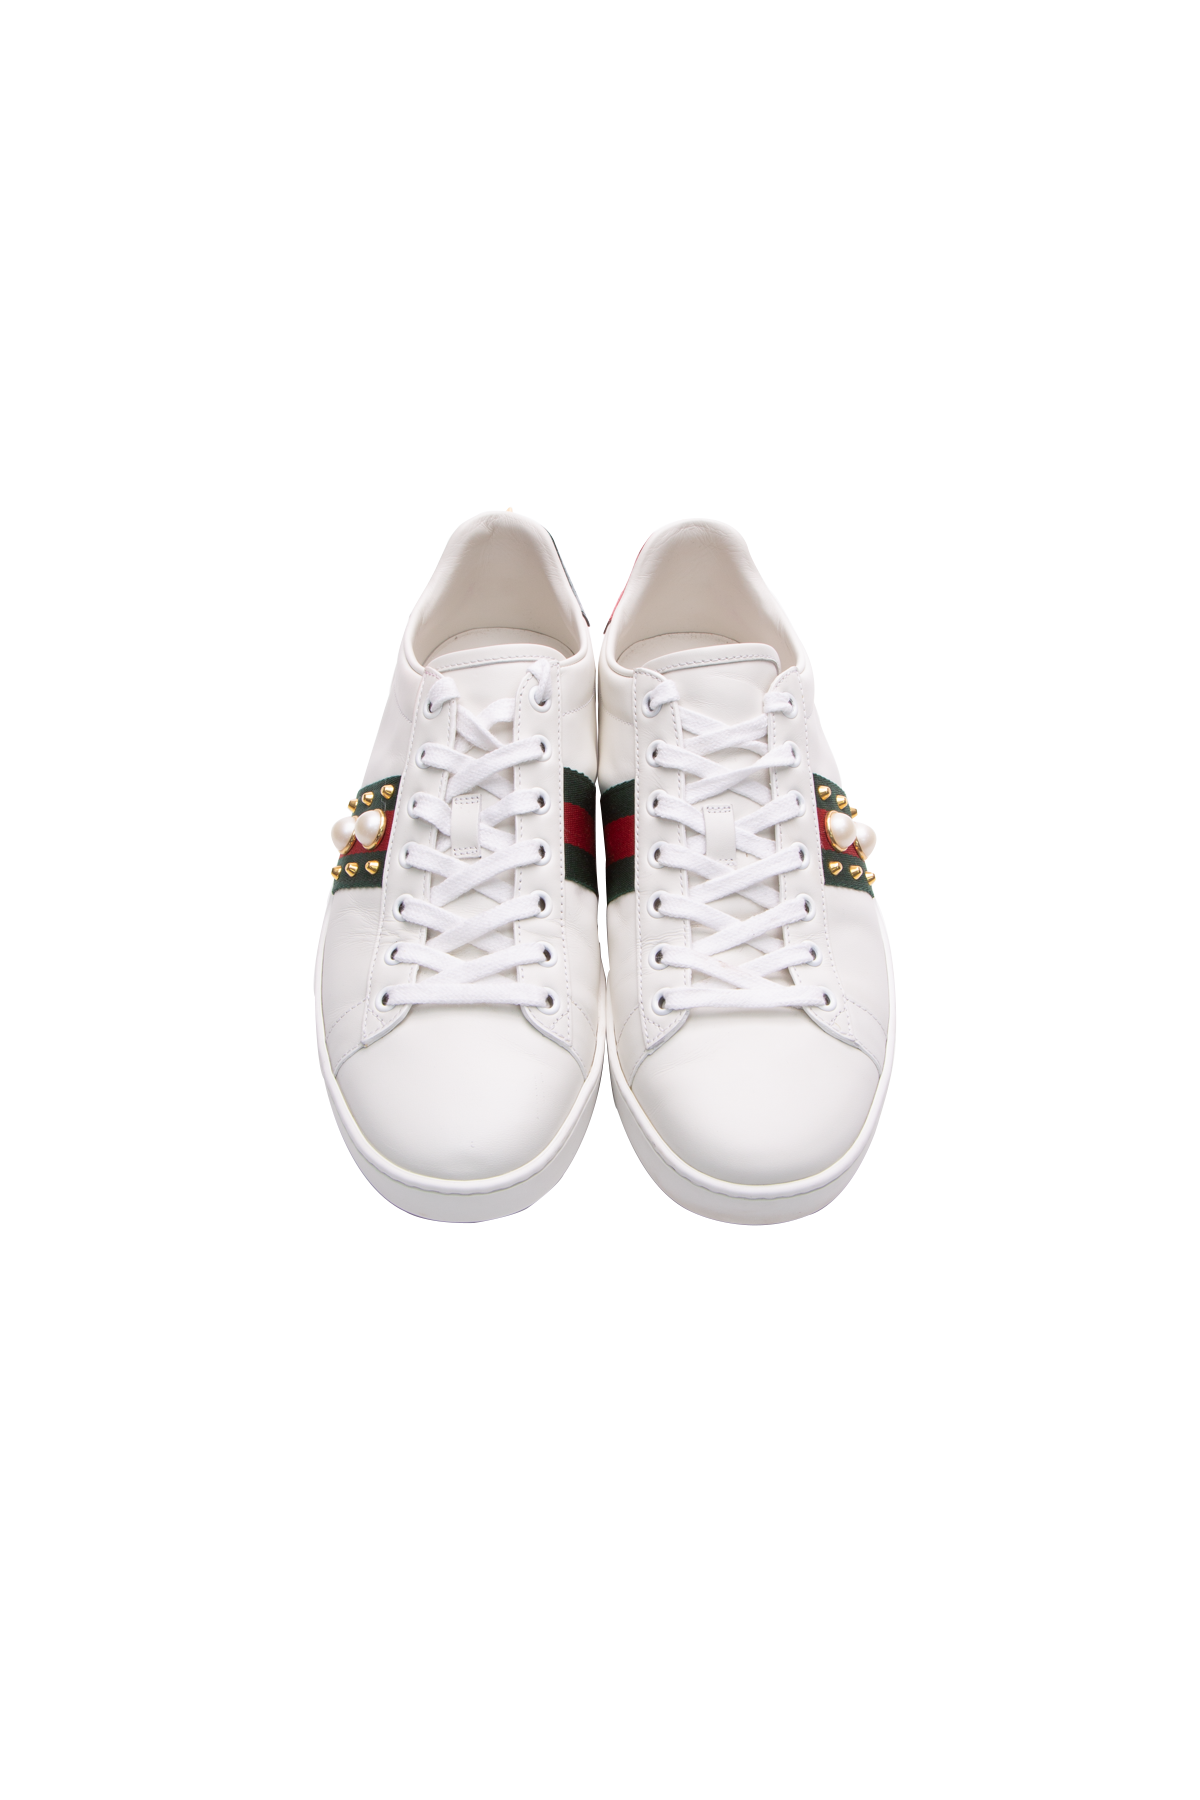 Gucci White Spike Pearl Ace Sneakers- Size 40